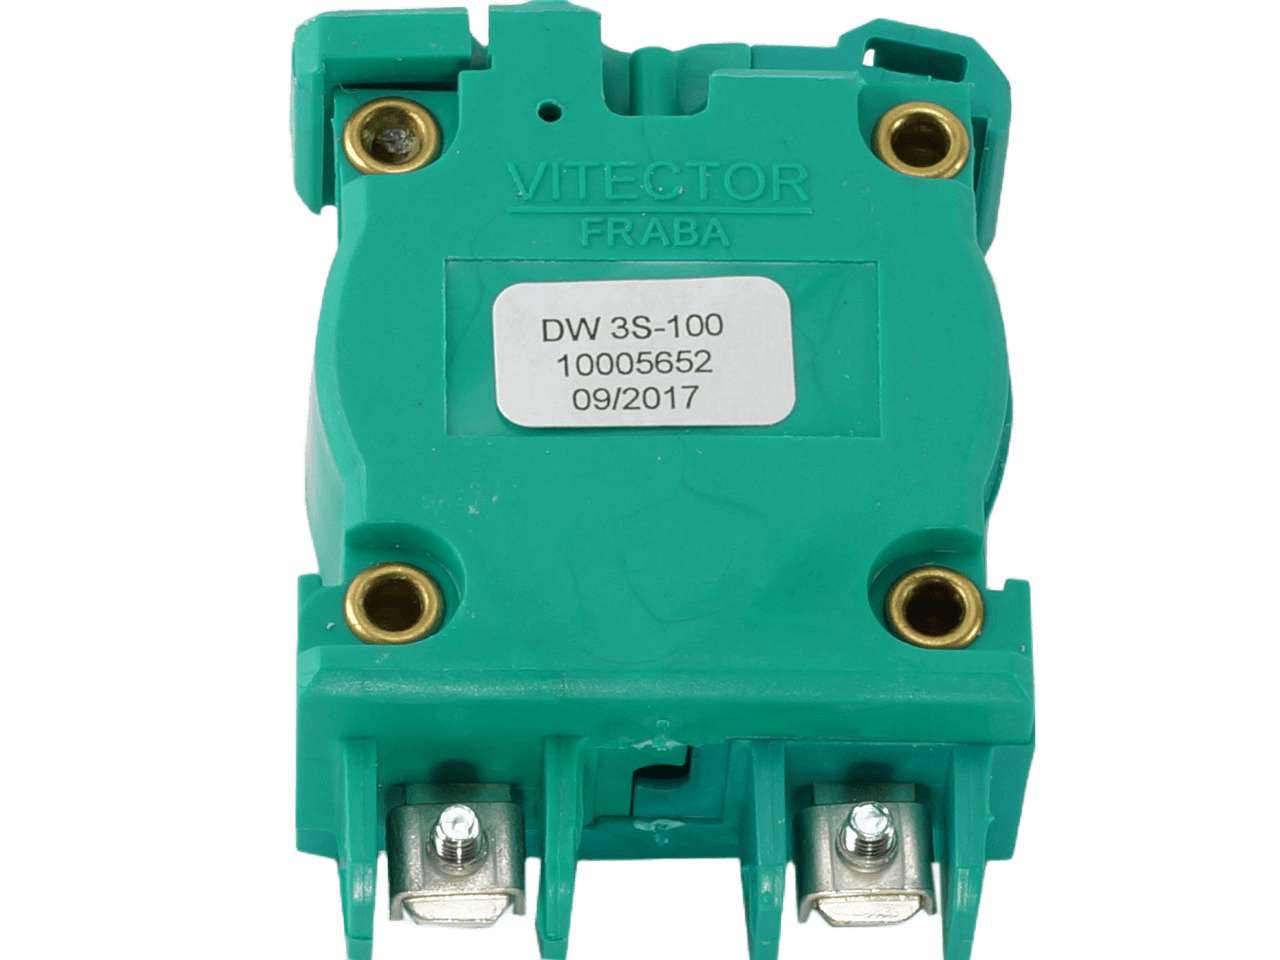 FRABA VITECTOR DW 3S-100 Airwave Switch Normally Open